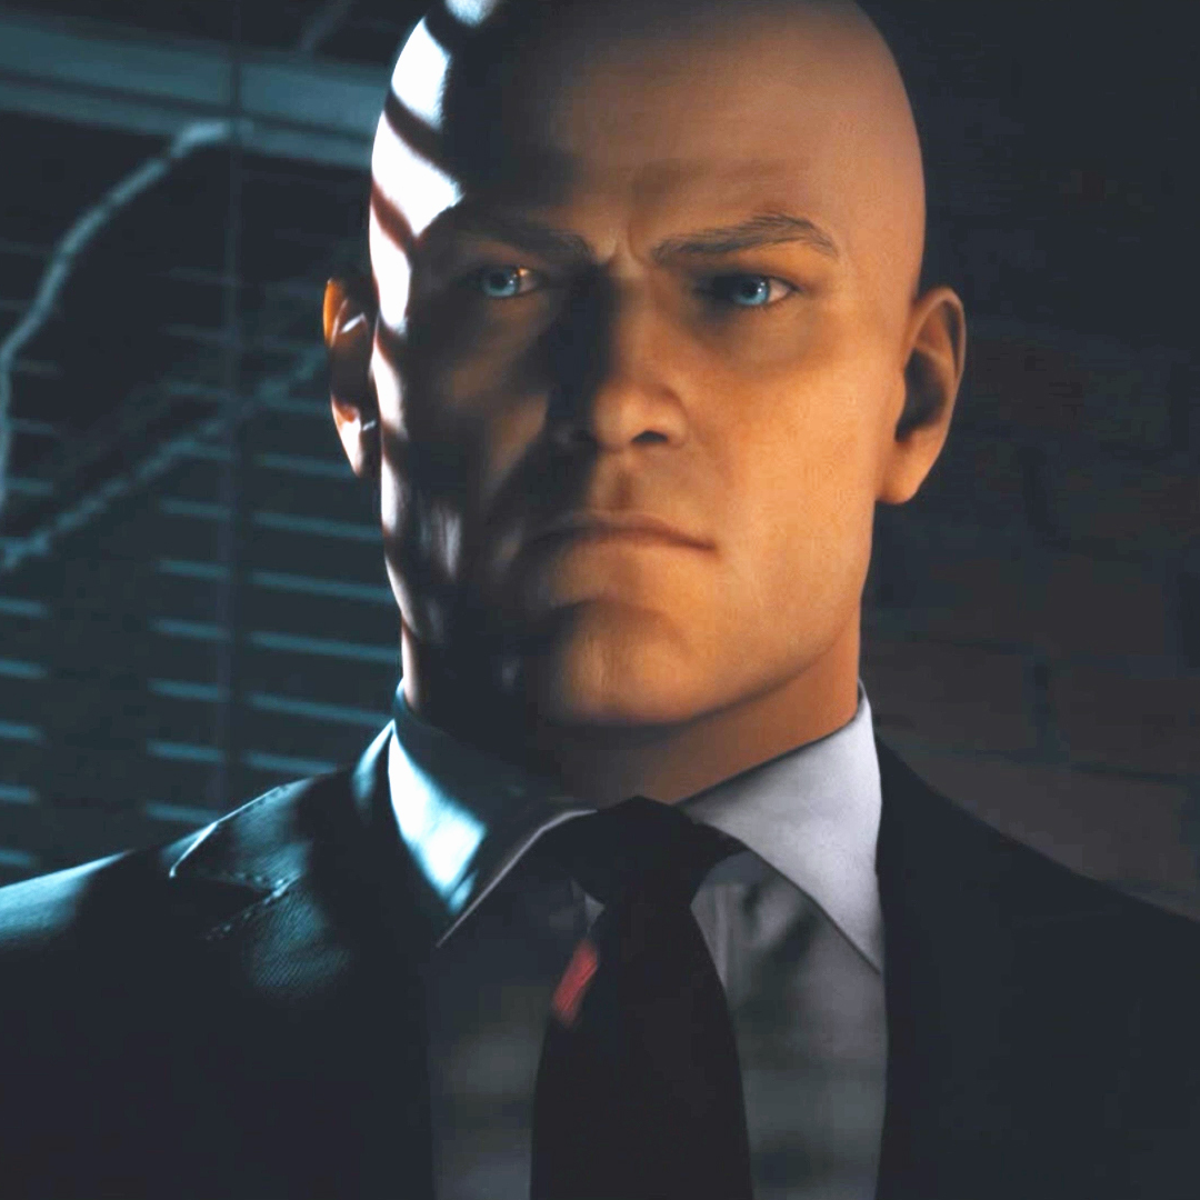 Hitman 3 review: One for the road